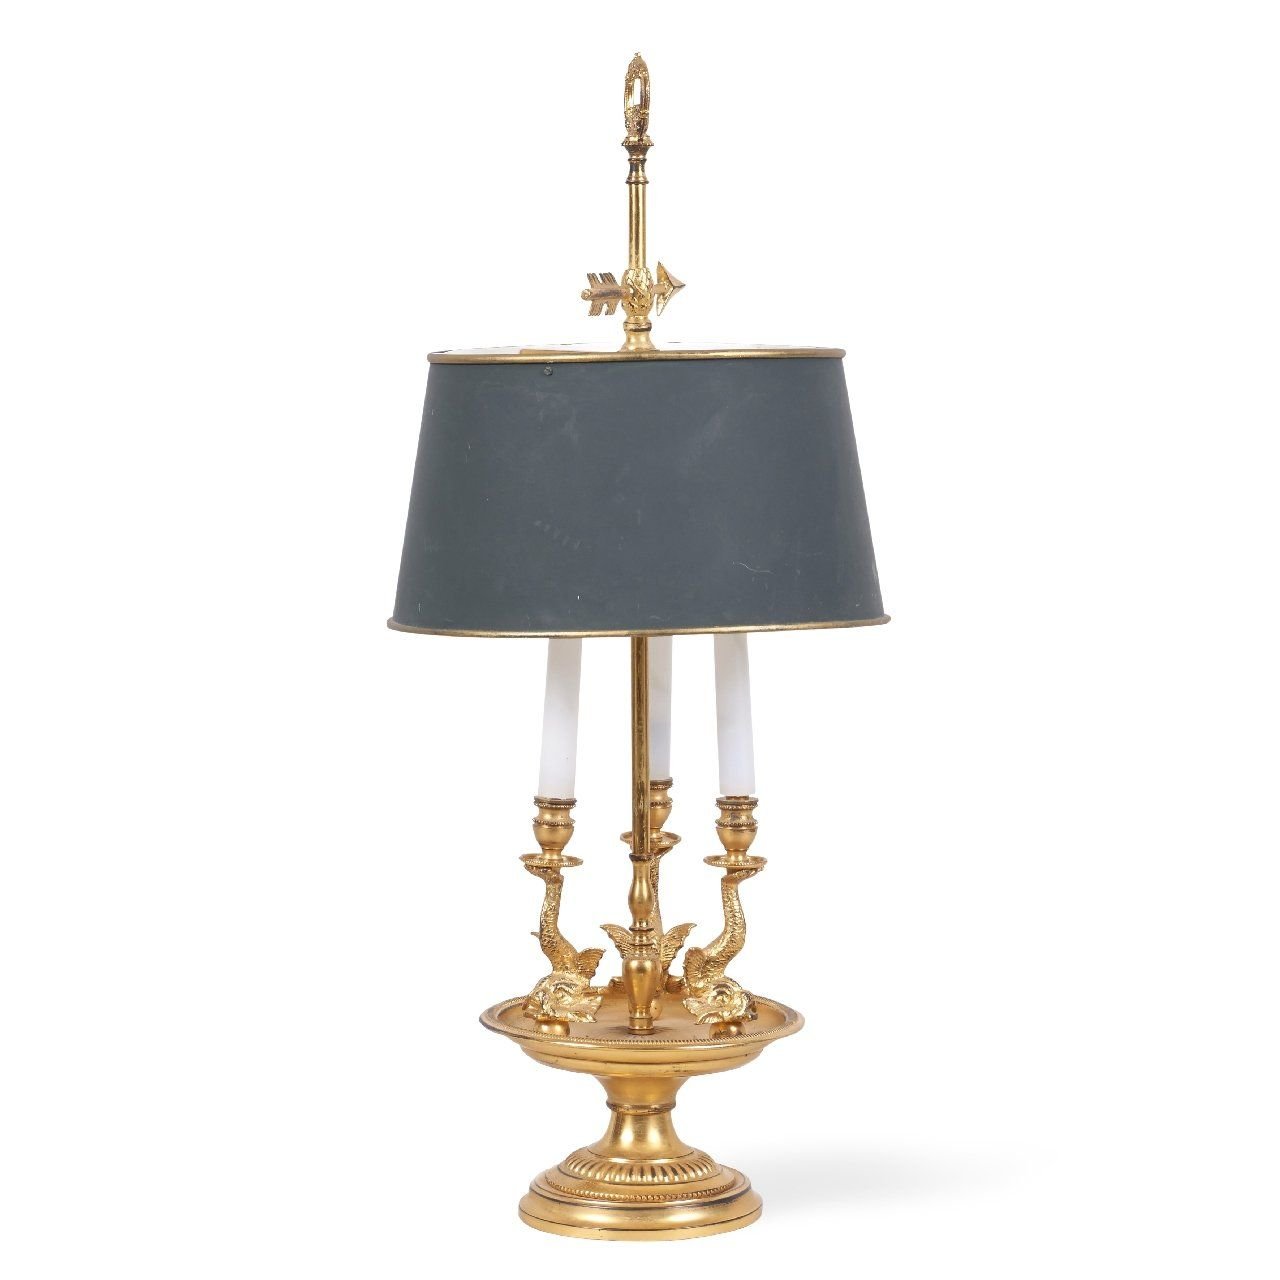 Antique French Empire Style Ormolu, Styles Of Antique Table Lamps